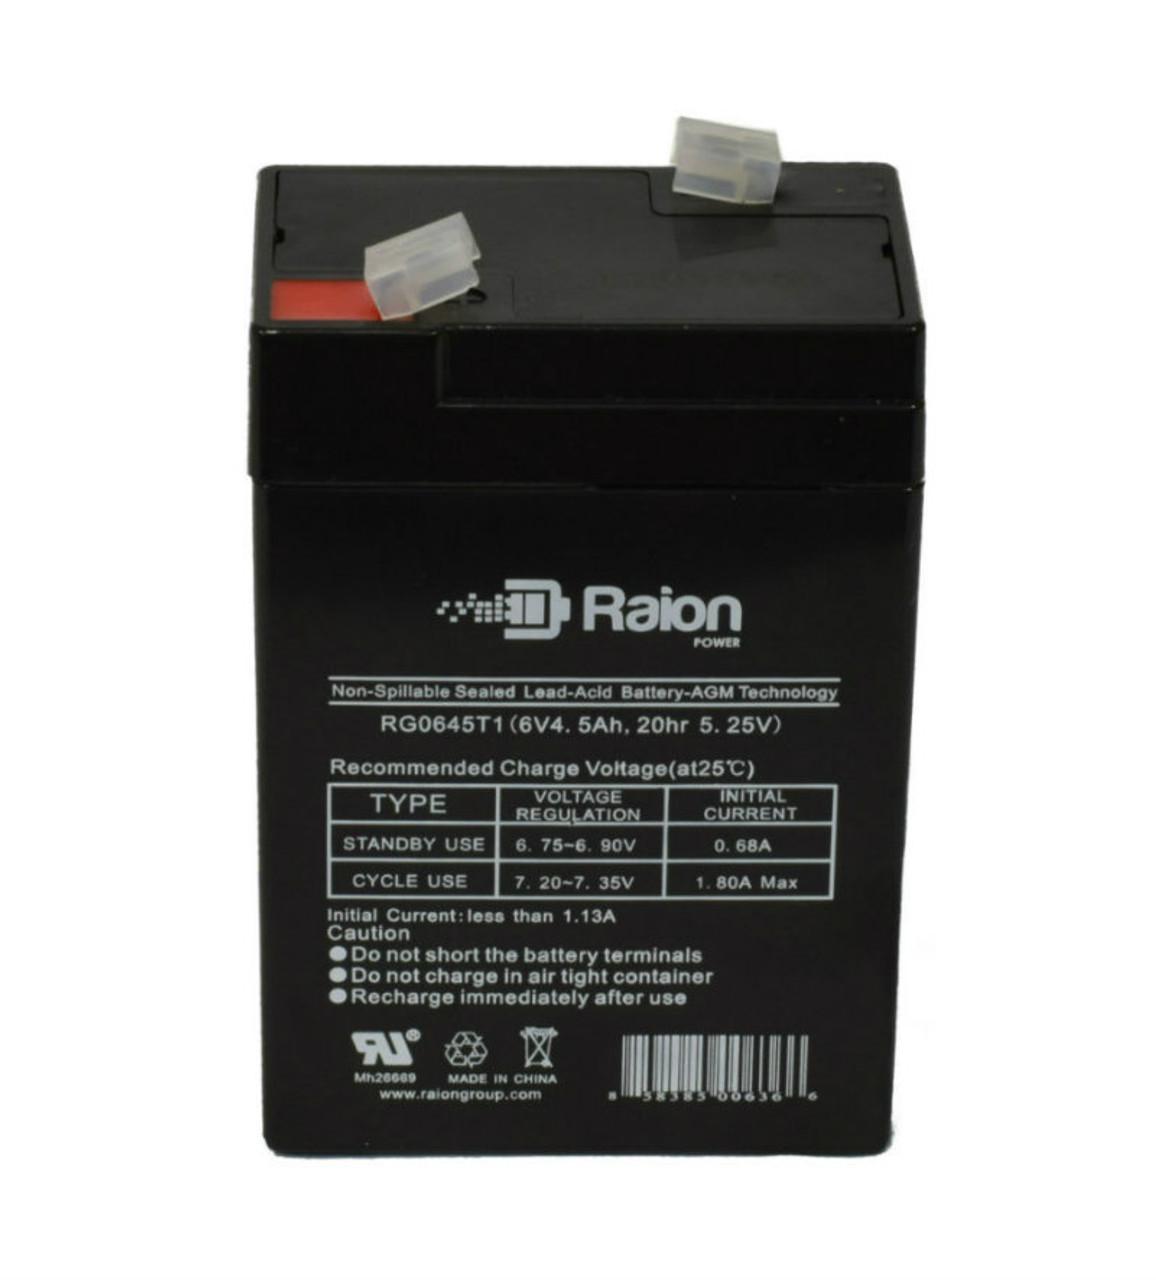 Raion Power RG0645T1 Replacement Battery Cartridge for Best Choice Products SKY1819 3-Wheel Motorcycle Ride-On - Pink